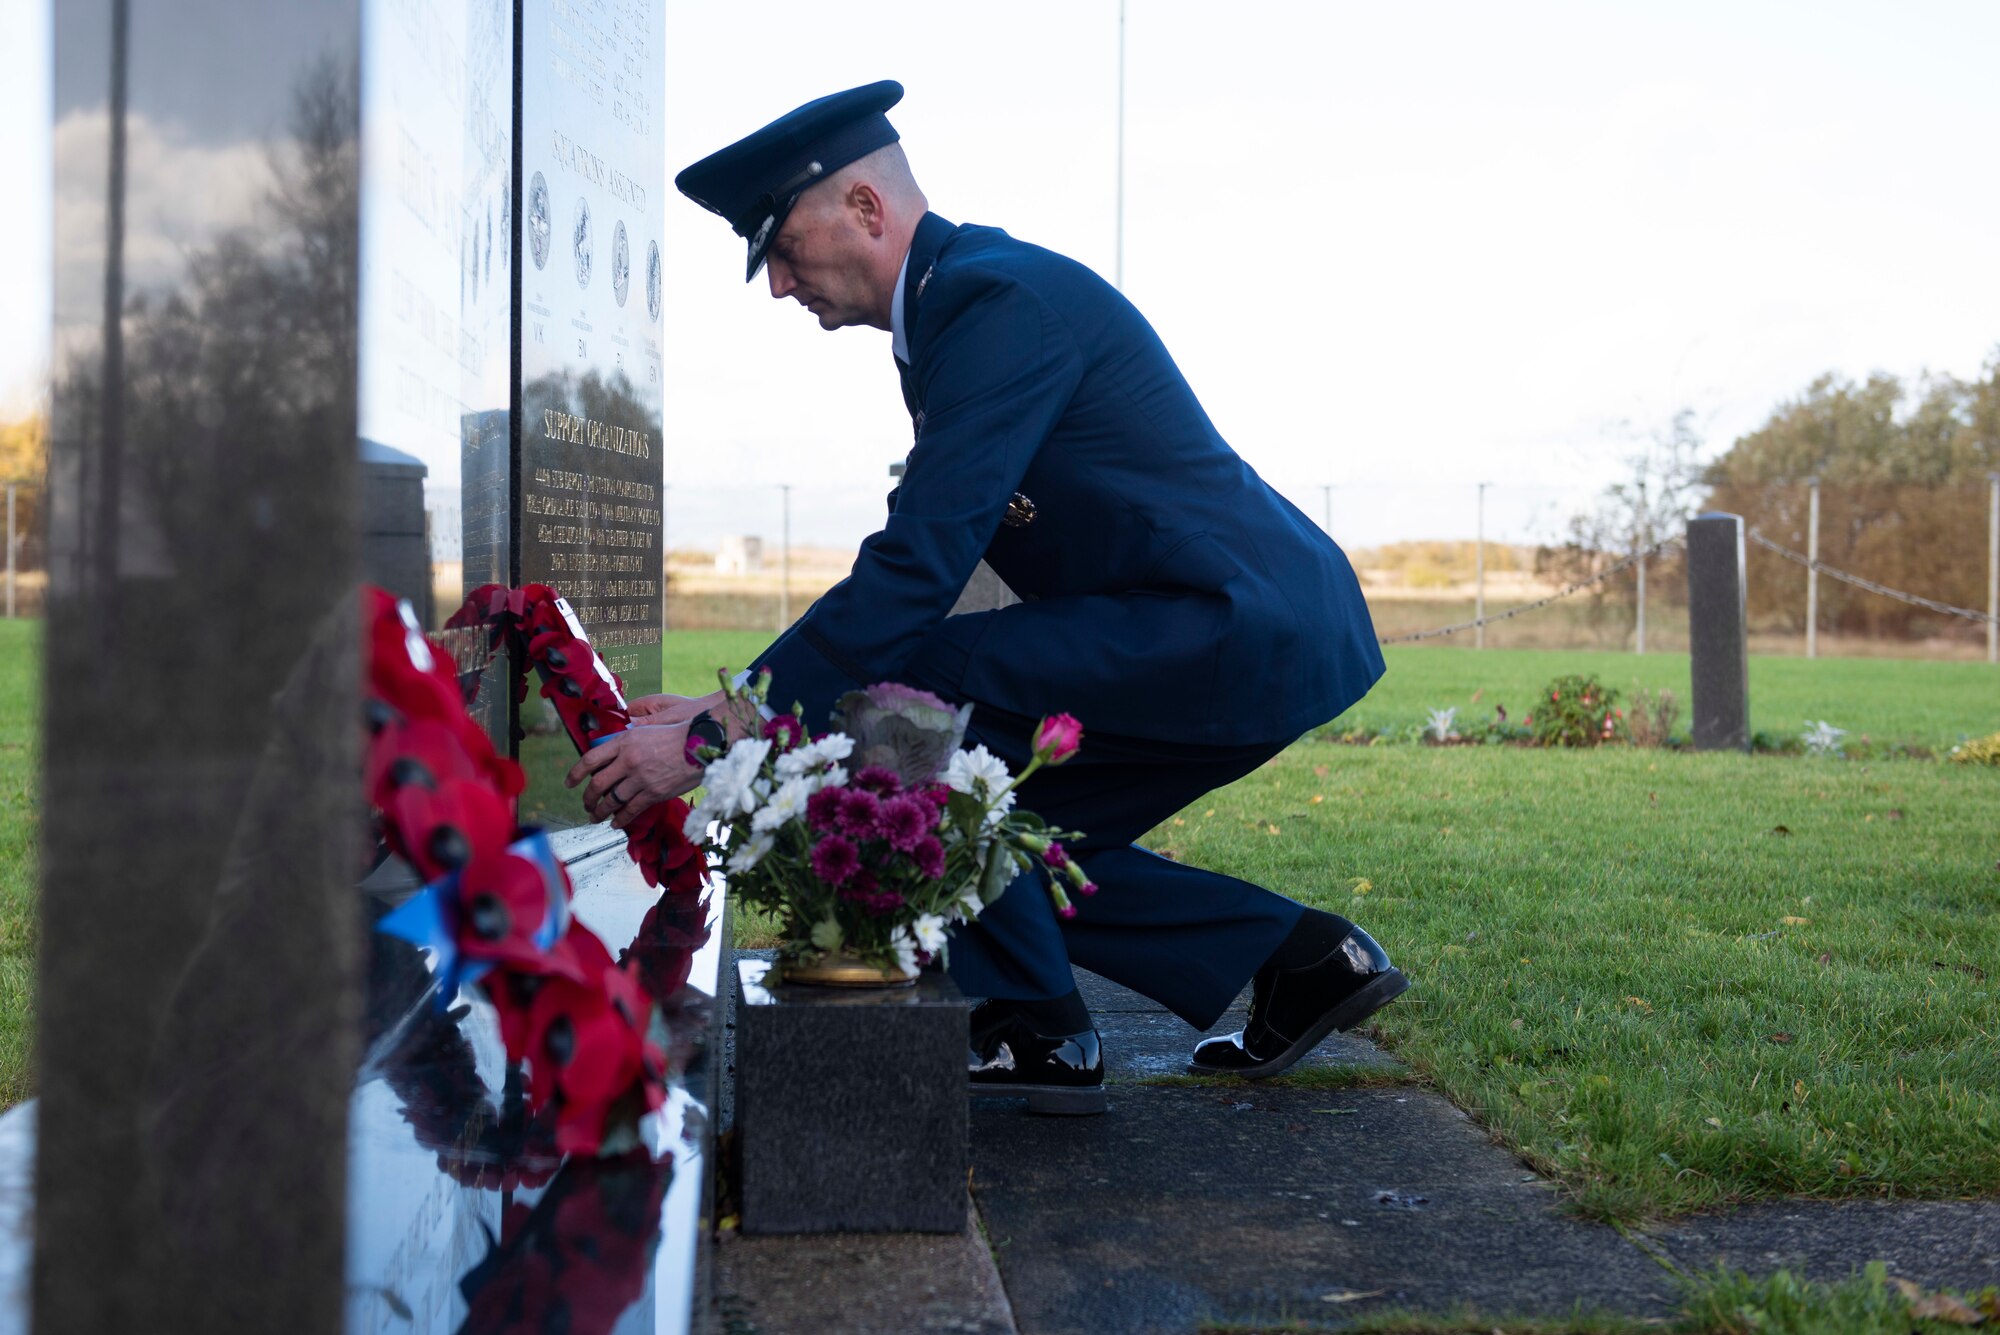 U.S. Air Force Col. Richard Martin, 423rd Air Base Group commander, lays a wreath during a Remembrance Sunday ceremony at the 303rd Bombardment Group memorial monument at RAF Molesworth, England, Nov. 3, 2020. Remembrance Sunday is commemorated the second Sunday every November to honor the service and sacrifice of Armed Forces, British and Commonwealth veterans, as well as the Allies that fought alongside them in the two World Wars and later conflicts. (U.S. Air Force photo by Senior Airman Jennifer Zima)